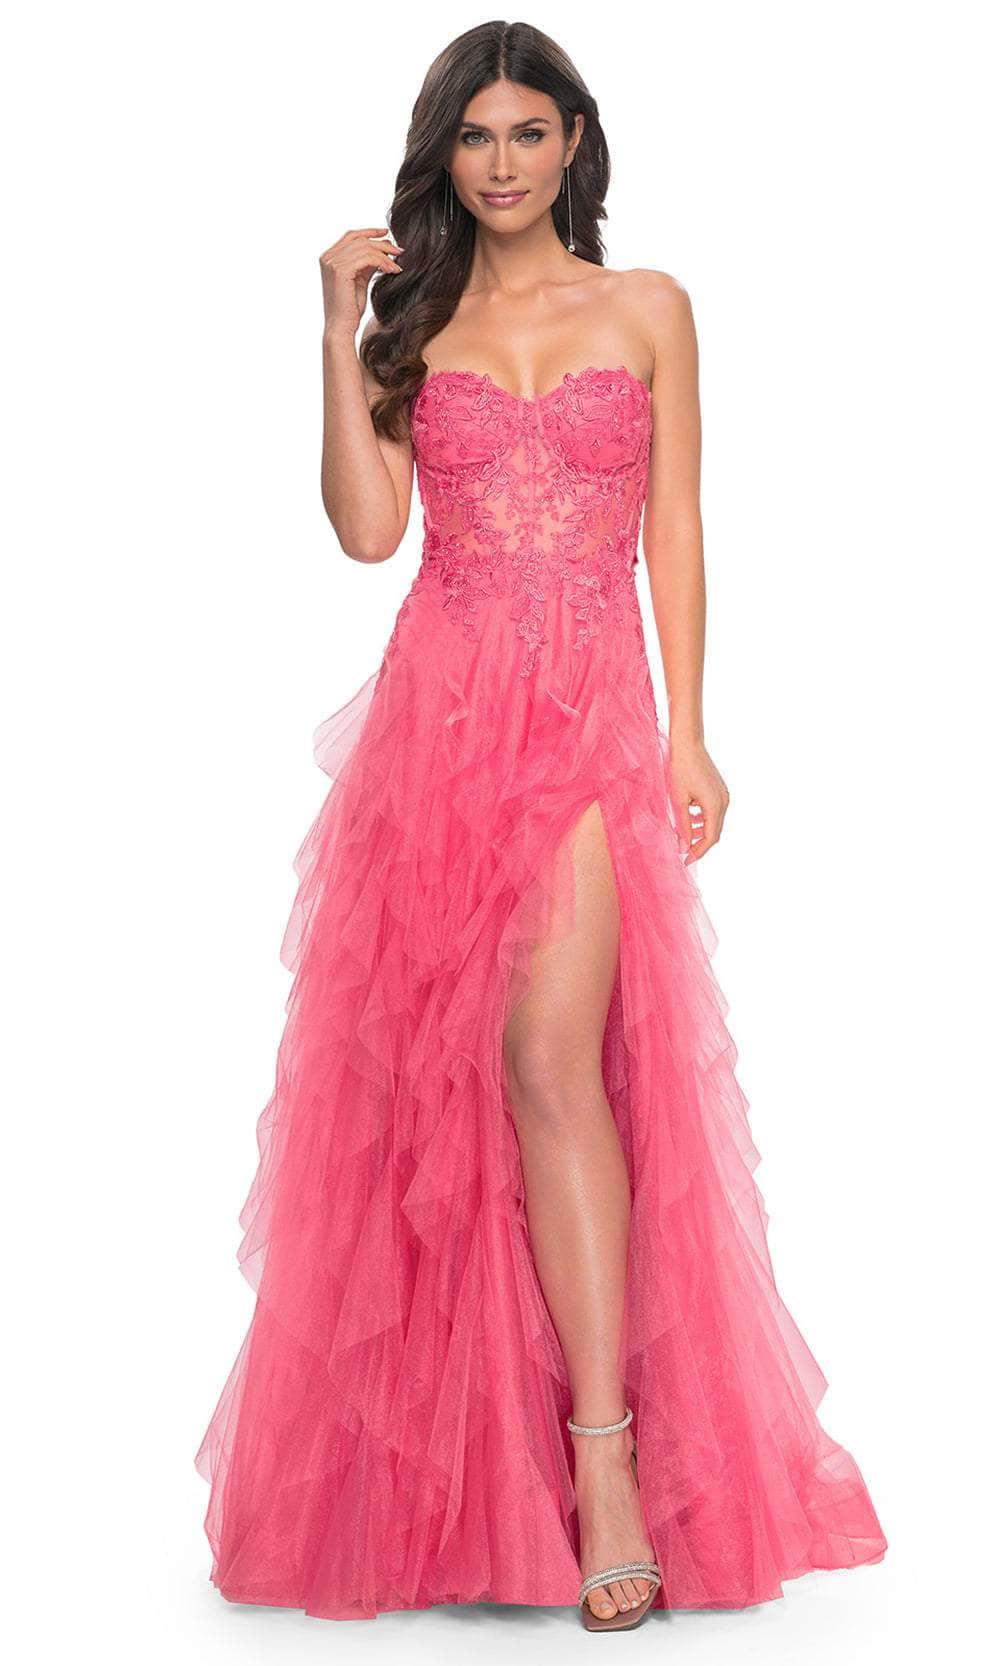 Image of La Femme 32286 - Strapless Ruffle A-Line Prom Gown